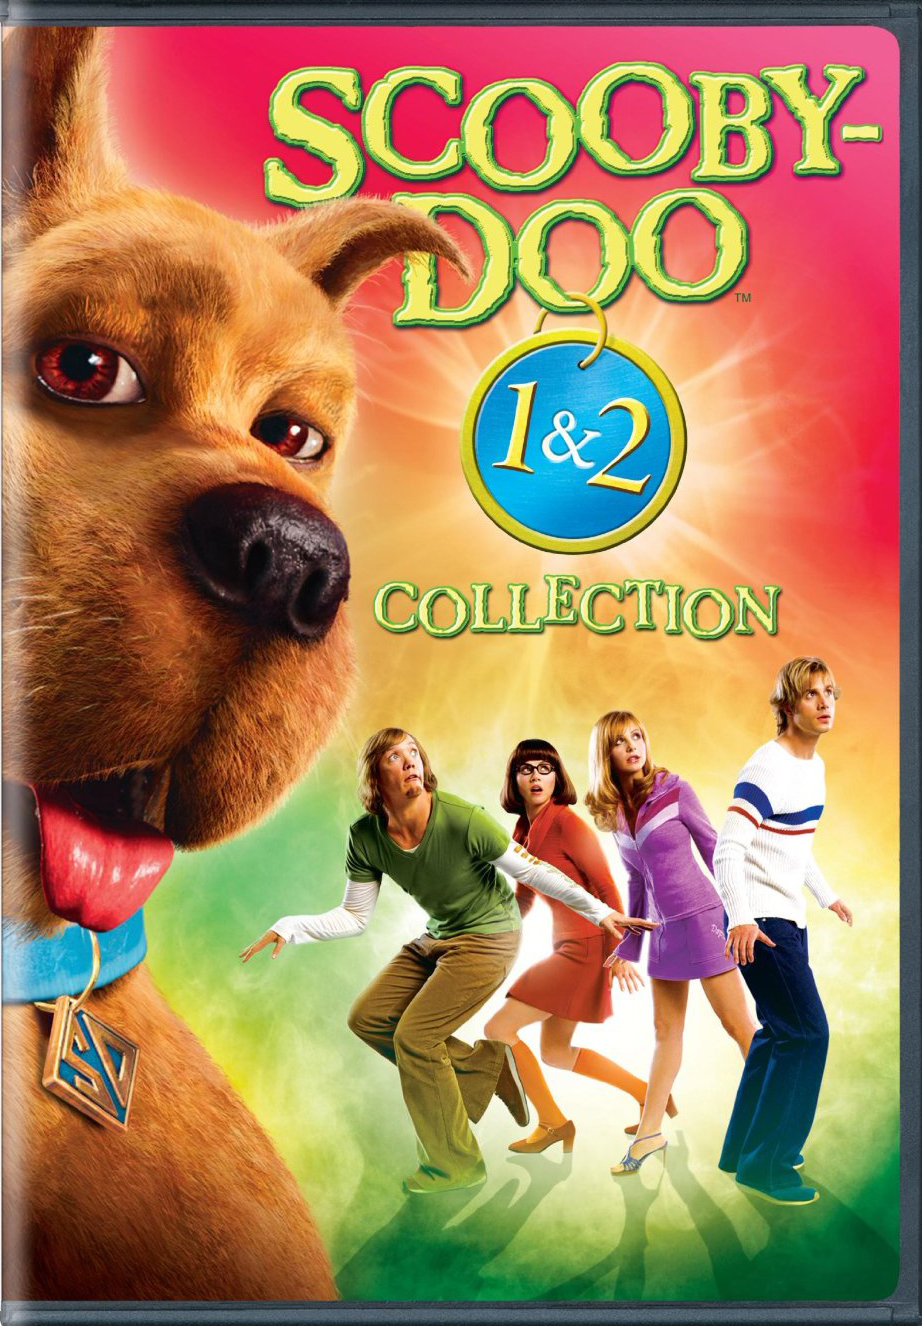 Scooby Doo 1 & 2 Collection